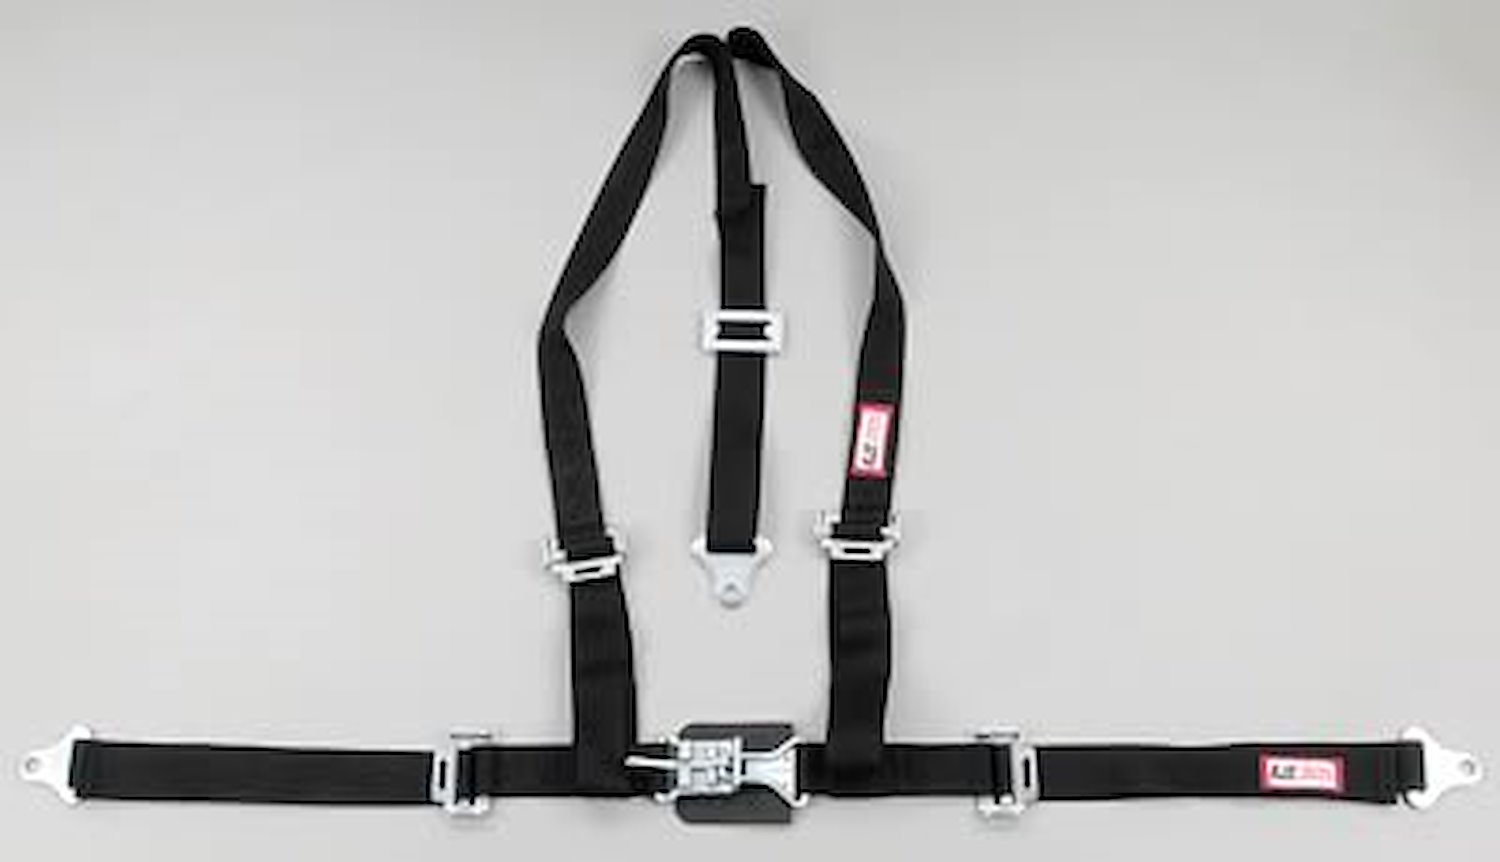 NON-SFI L&L HARNESS 3 PULL DOWN Lap BELT SNAP SEWN IN 2 S.H. Y FLOOR Mount WRAP/BOLT HOT PINK